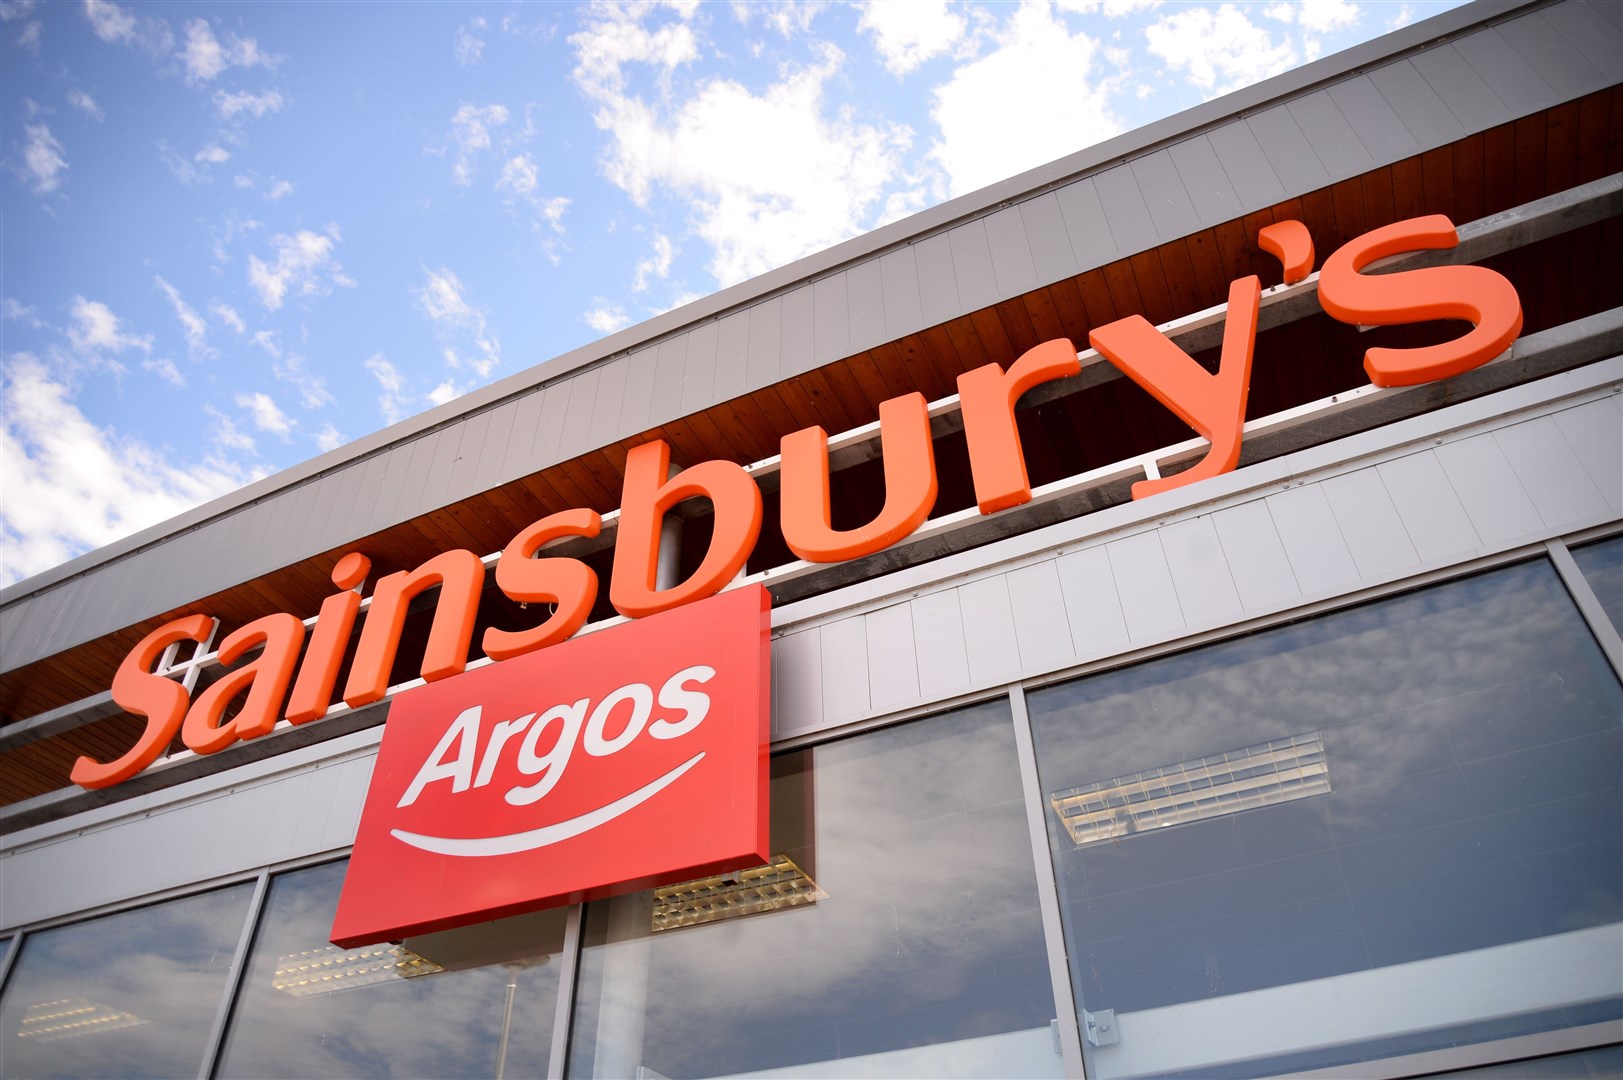 Argos is moving 150 of its stores into Sainsbury's supermarkets and creating a similar number of collection outlets. The Nairn branch already has an Argos outlet within the store.